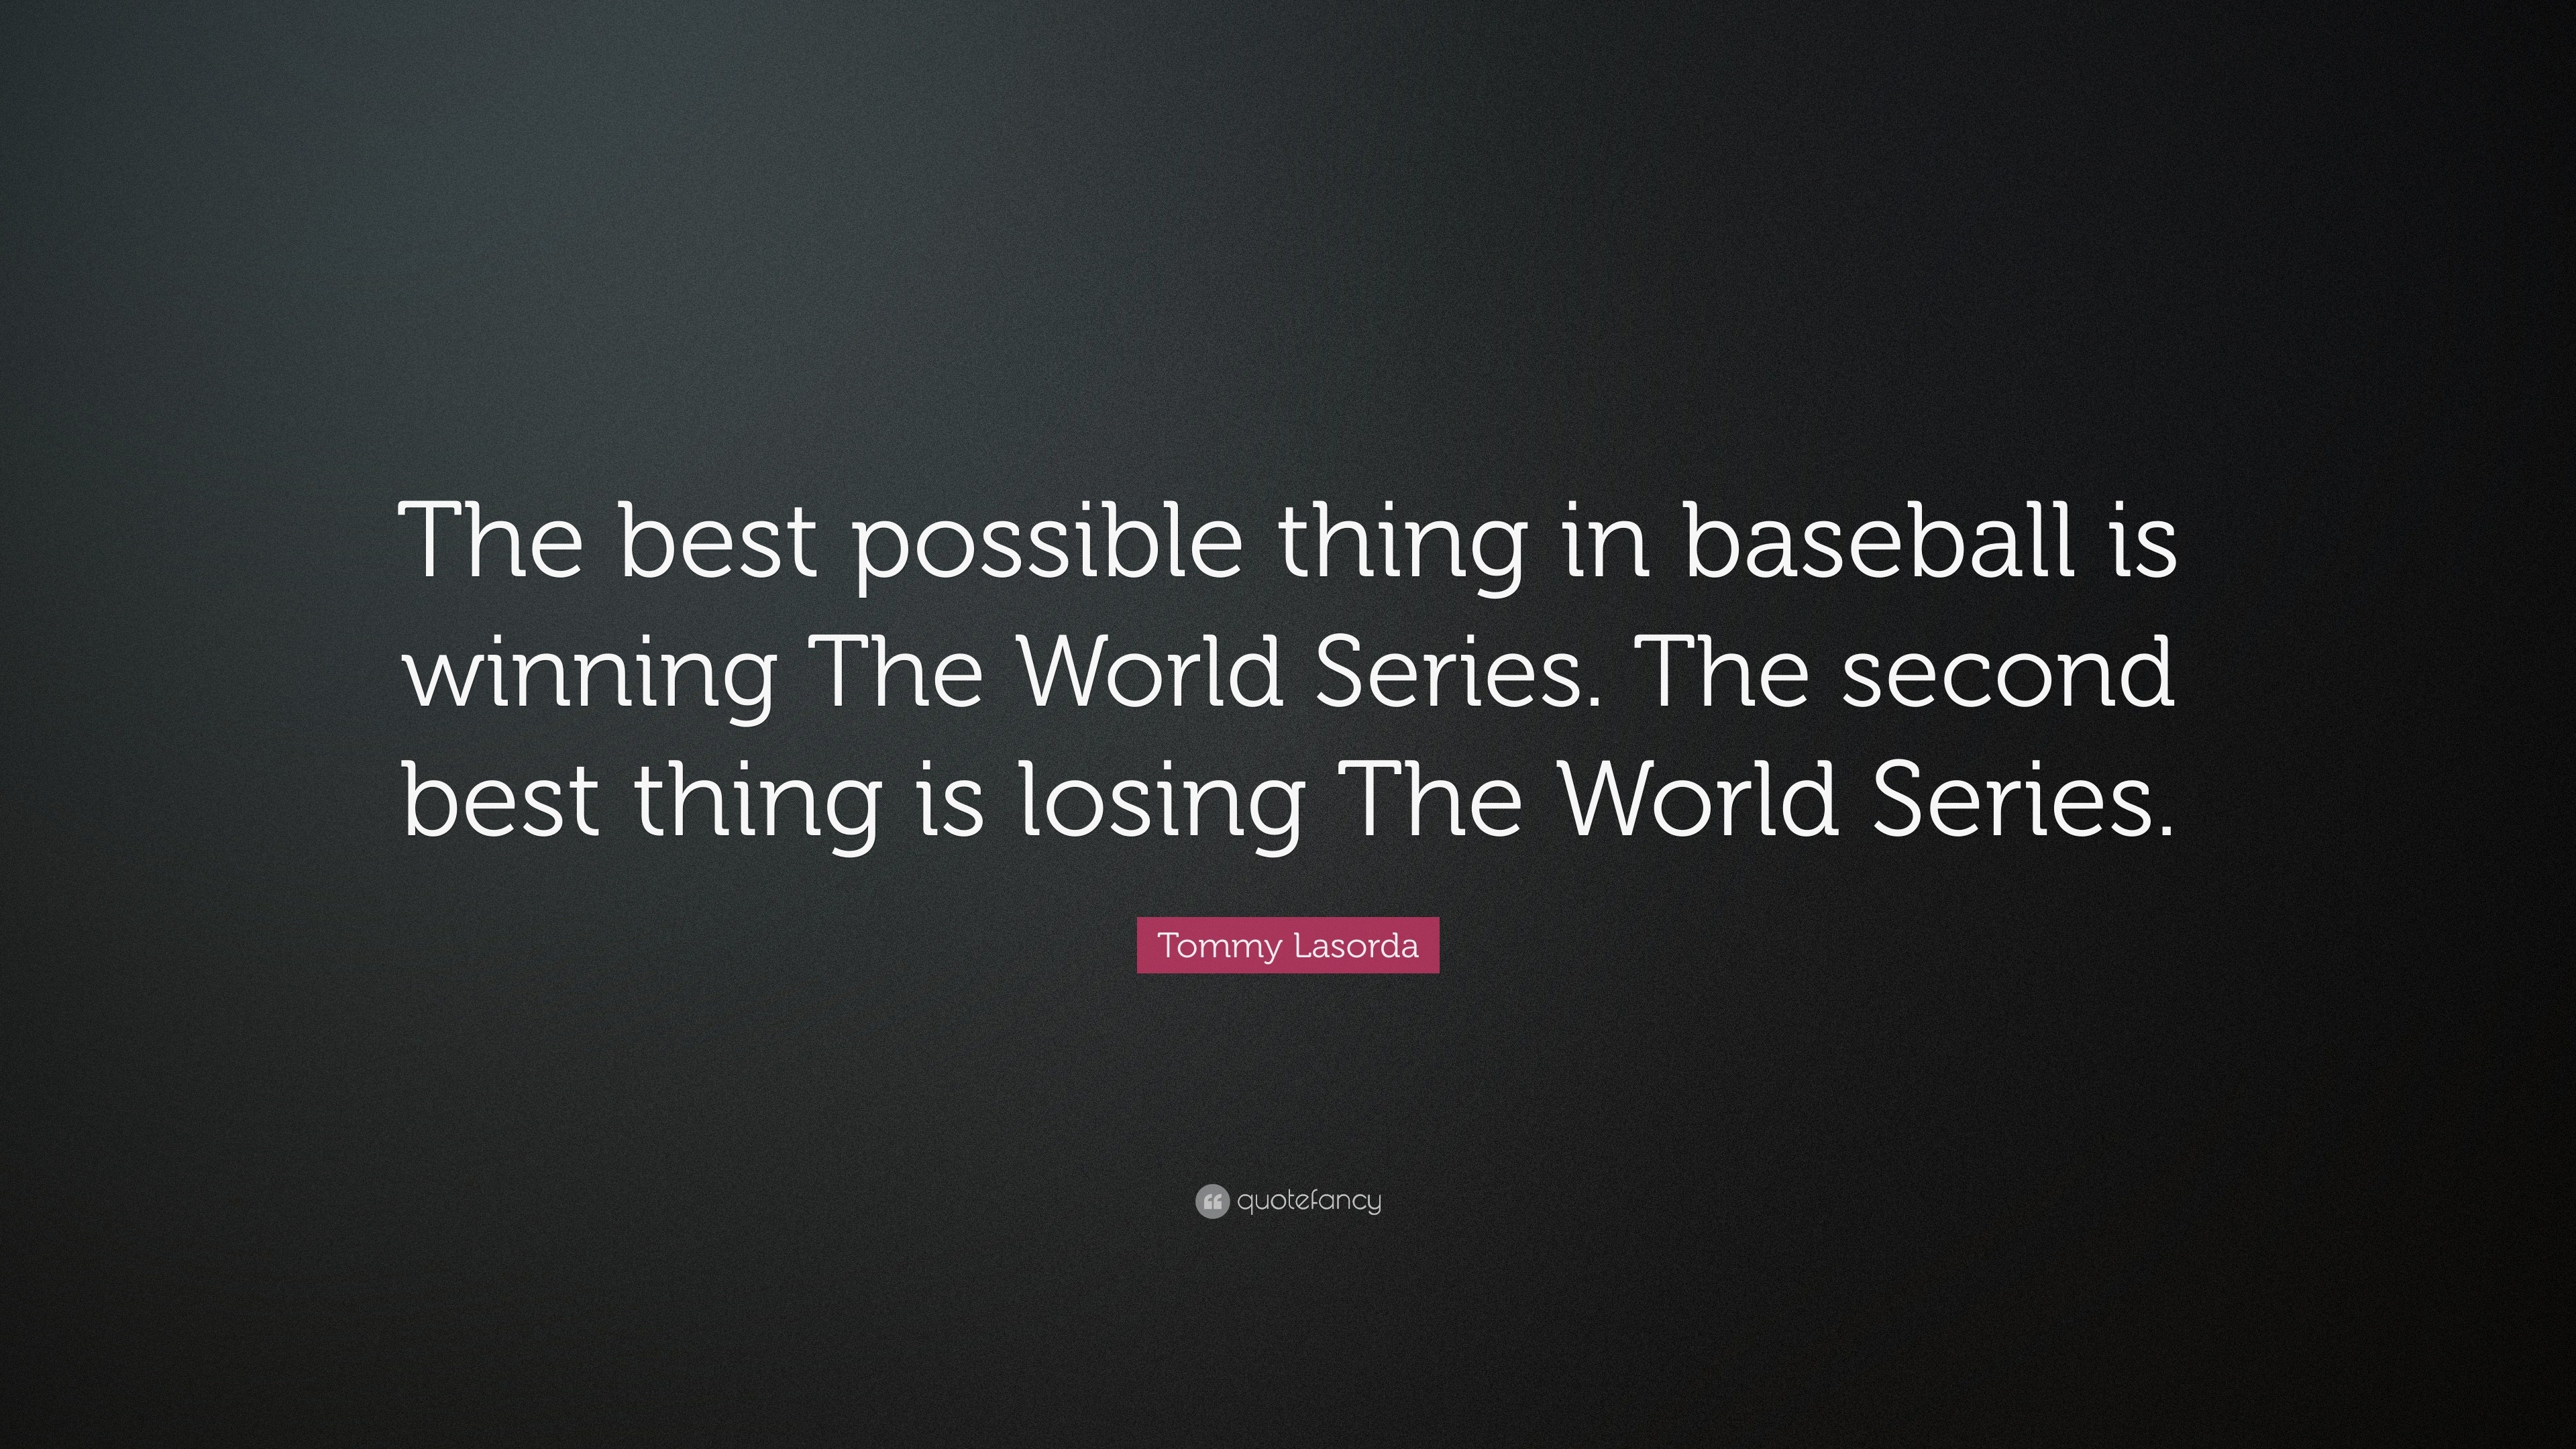 Tommy Lasorda Quote: “The best possible thing in baseball is